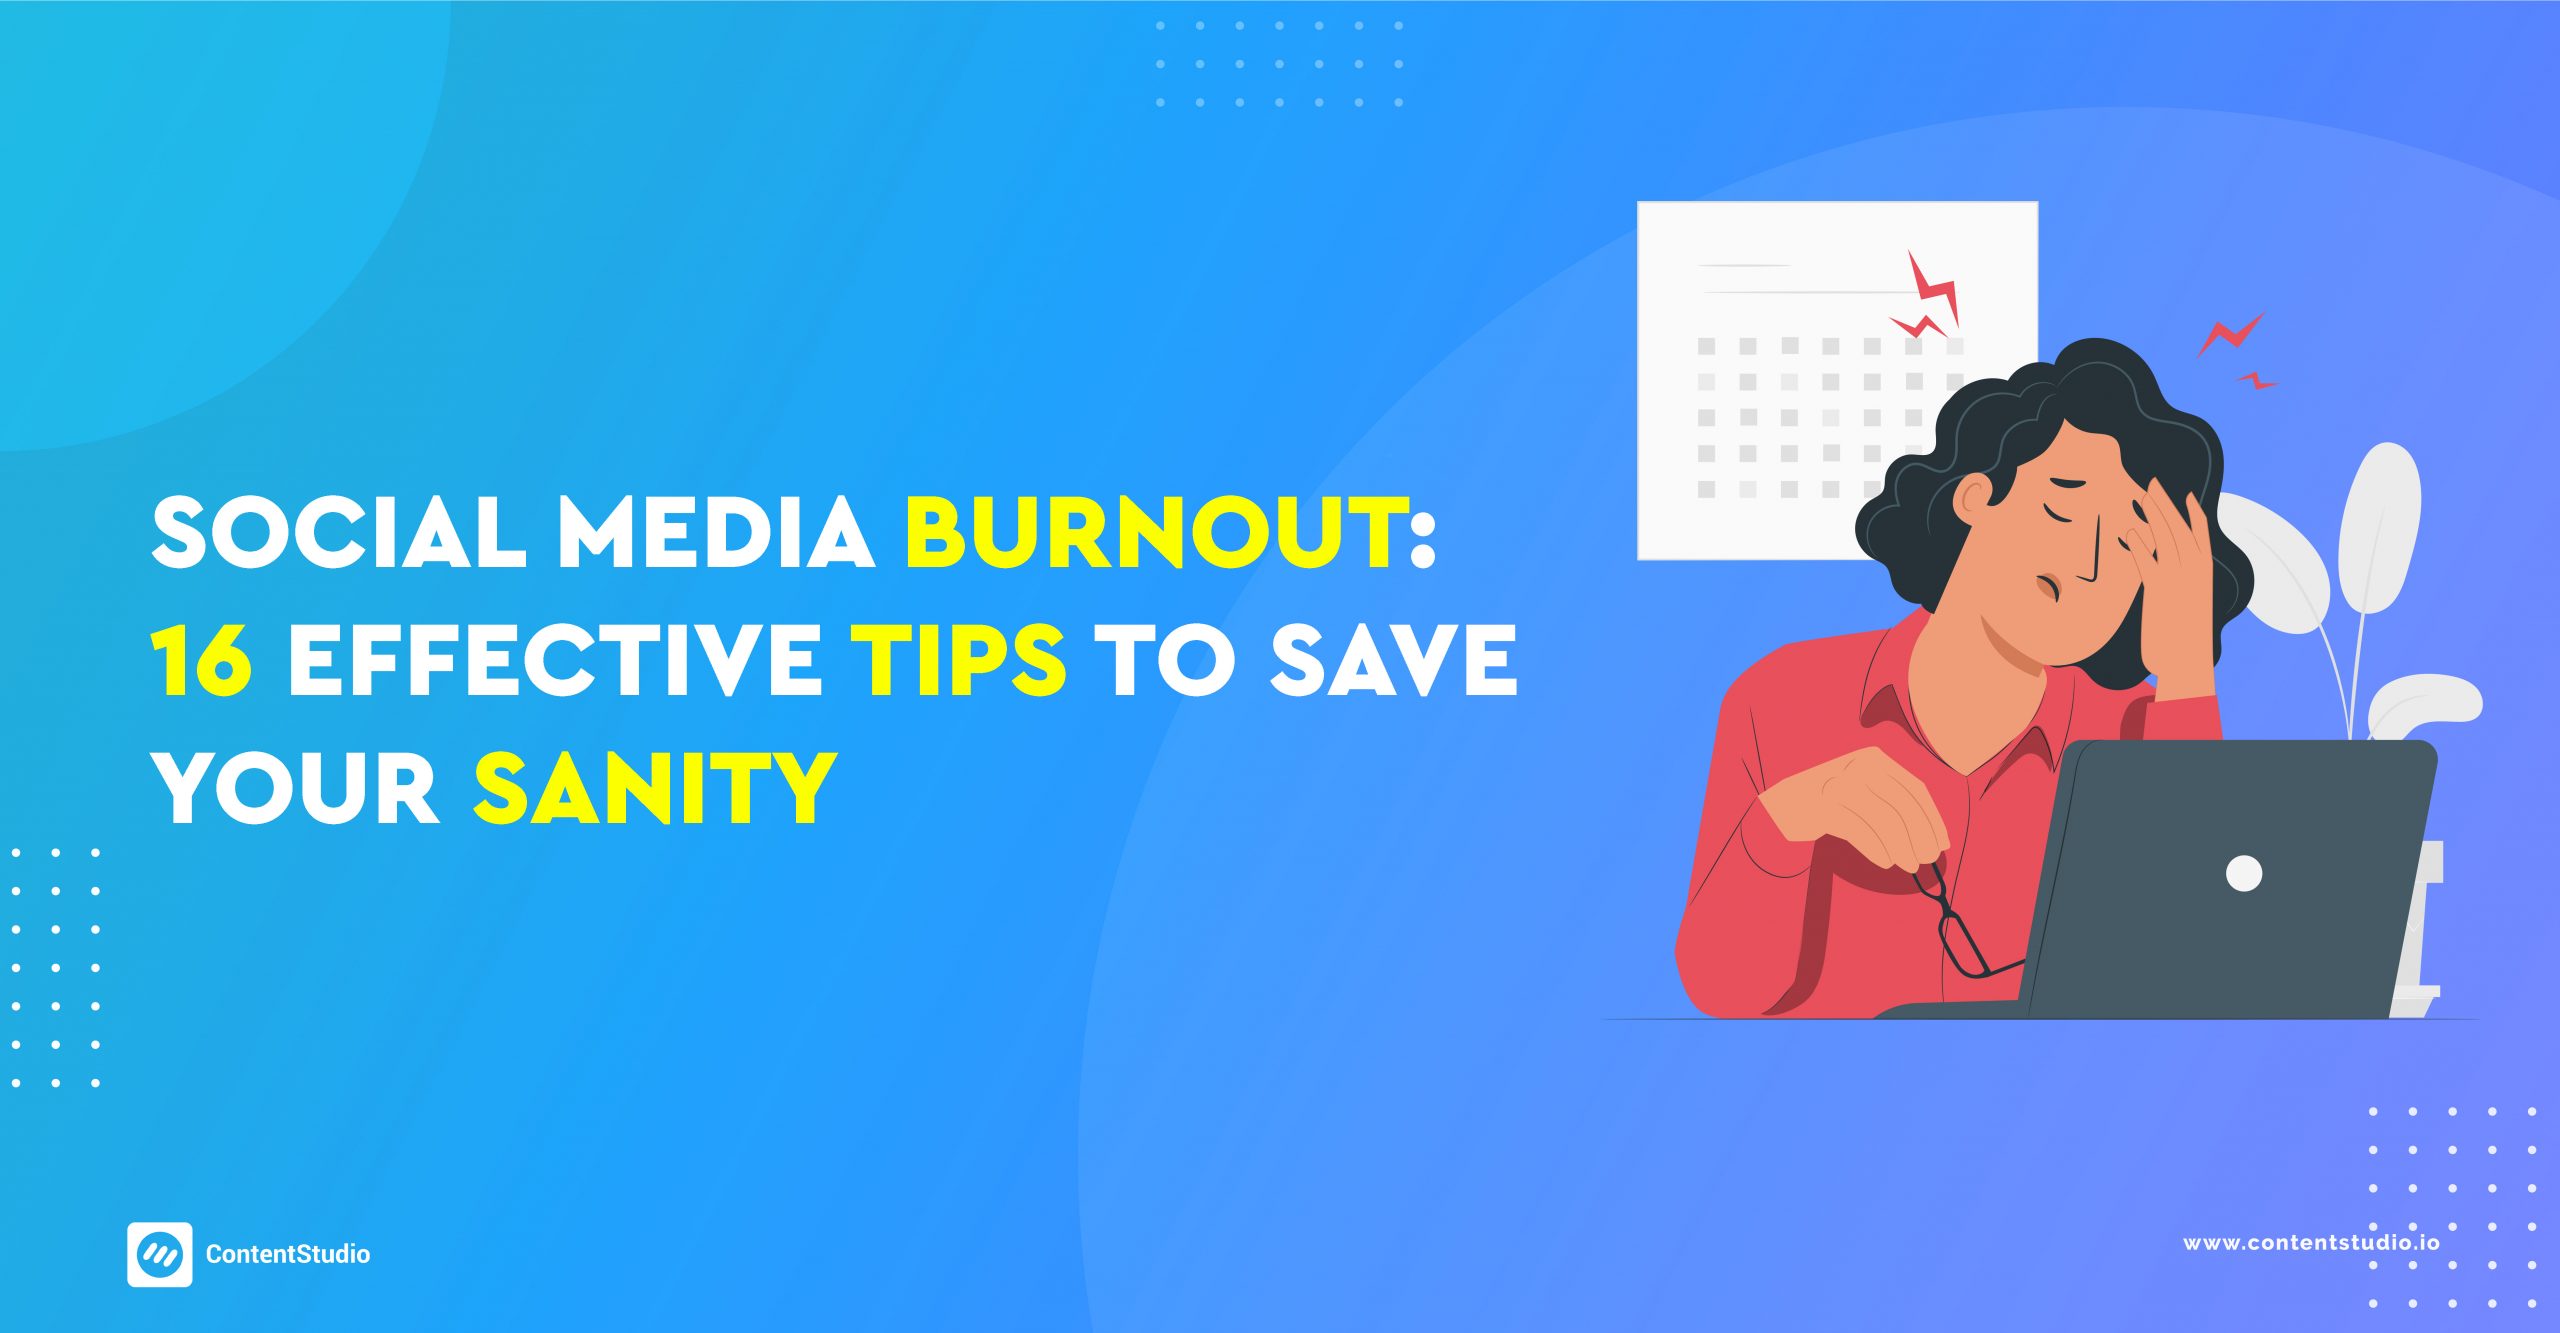 Social Media Burnout: 16 Effective Tips To Save Your Sanity